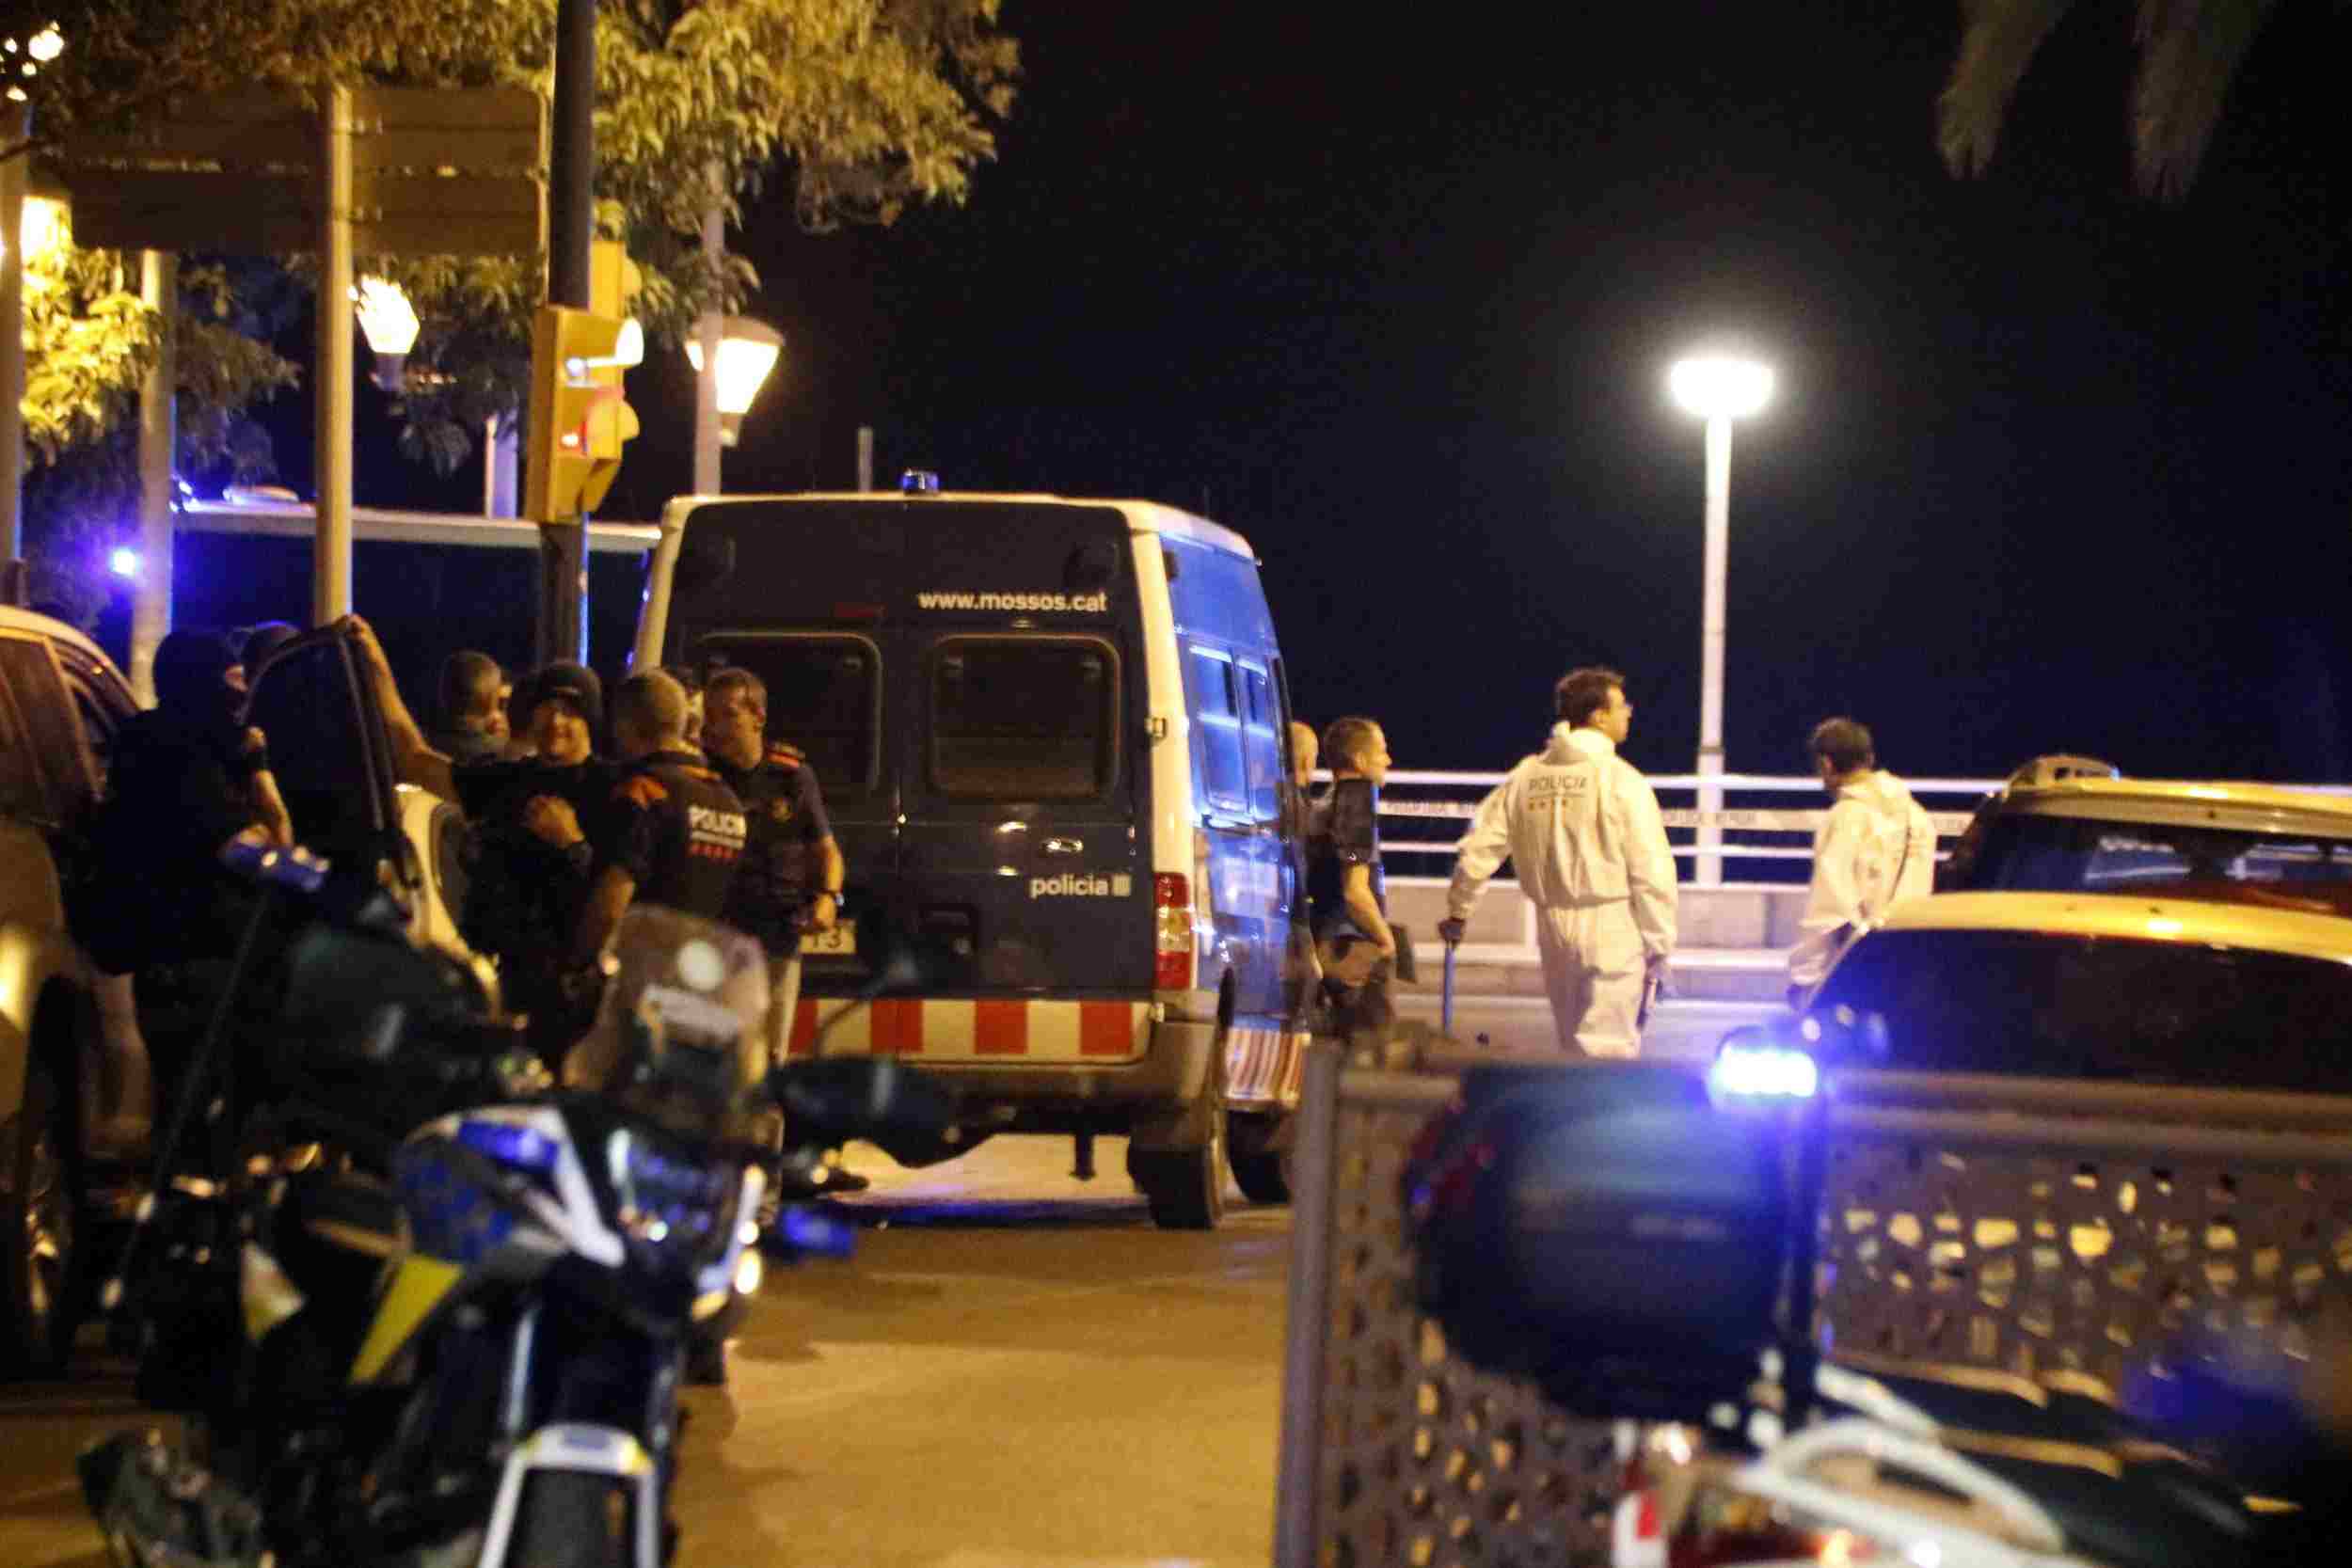 A single officer shot all five terrorists in Cambrils